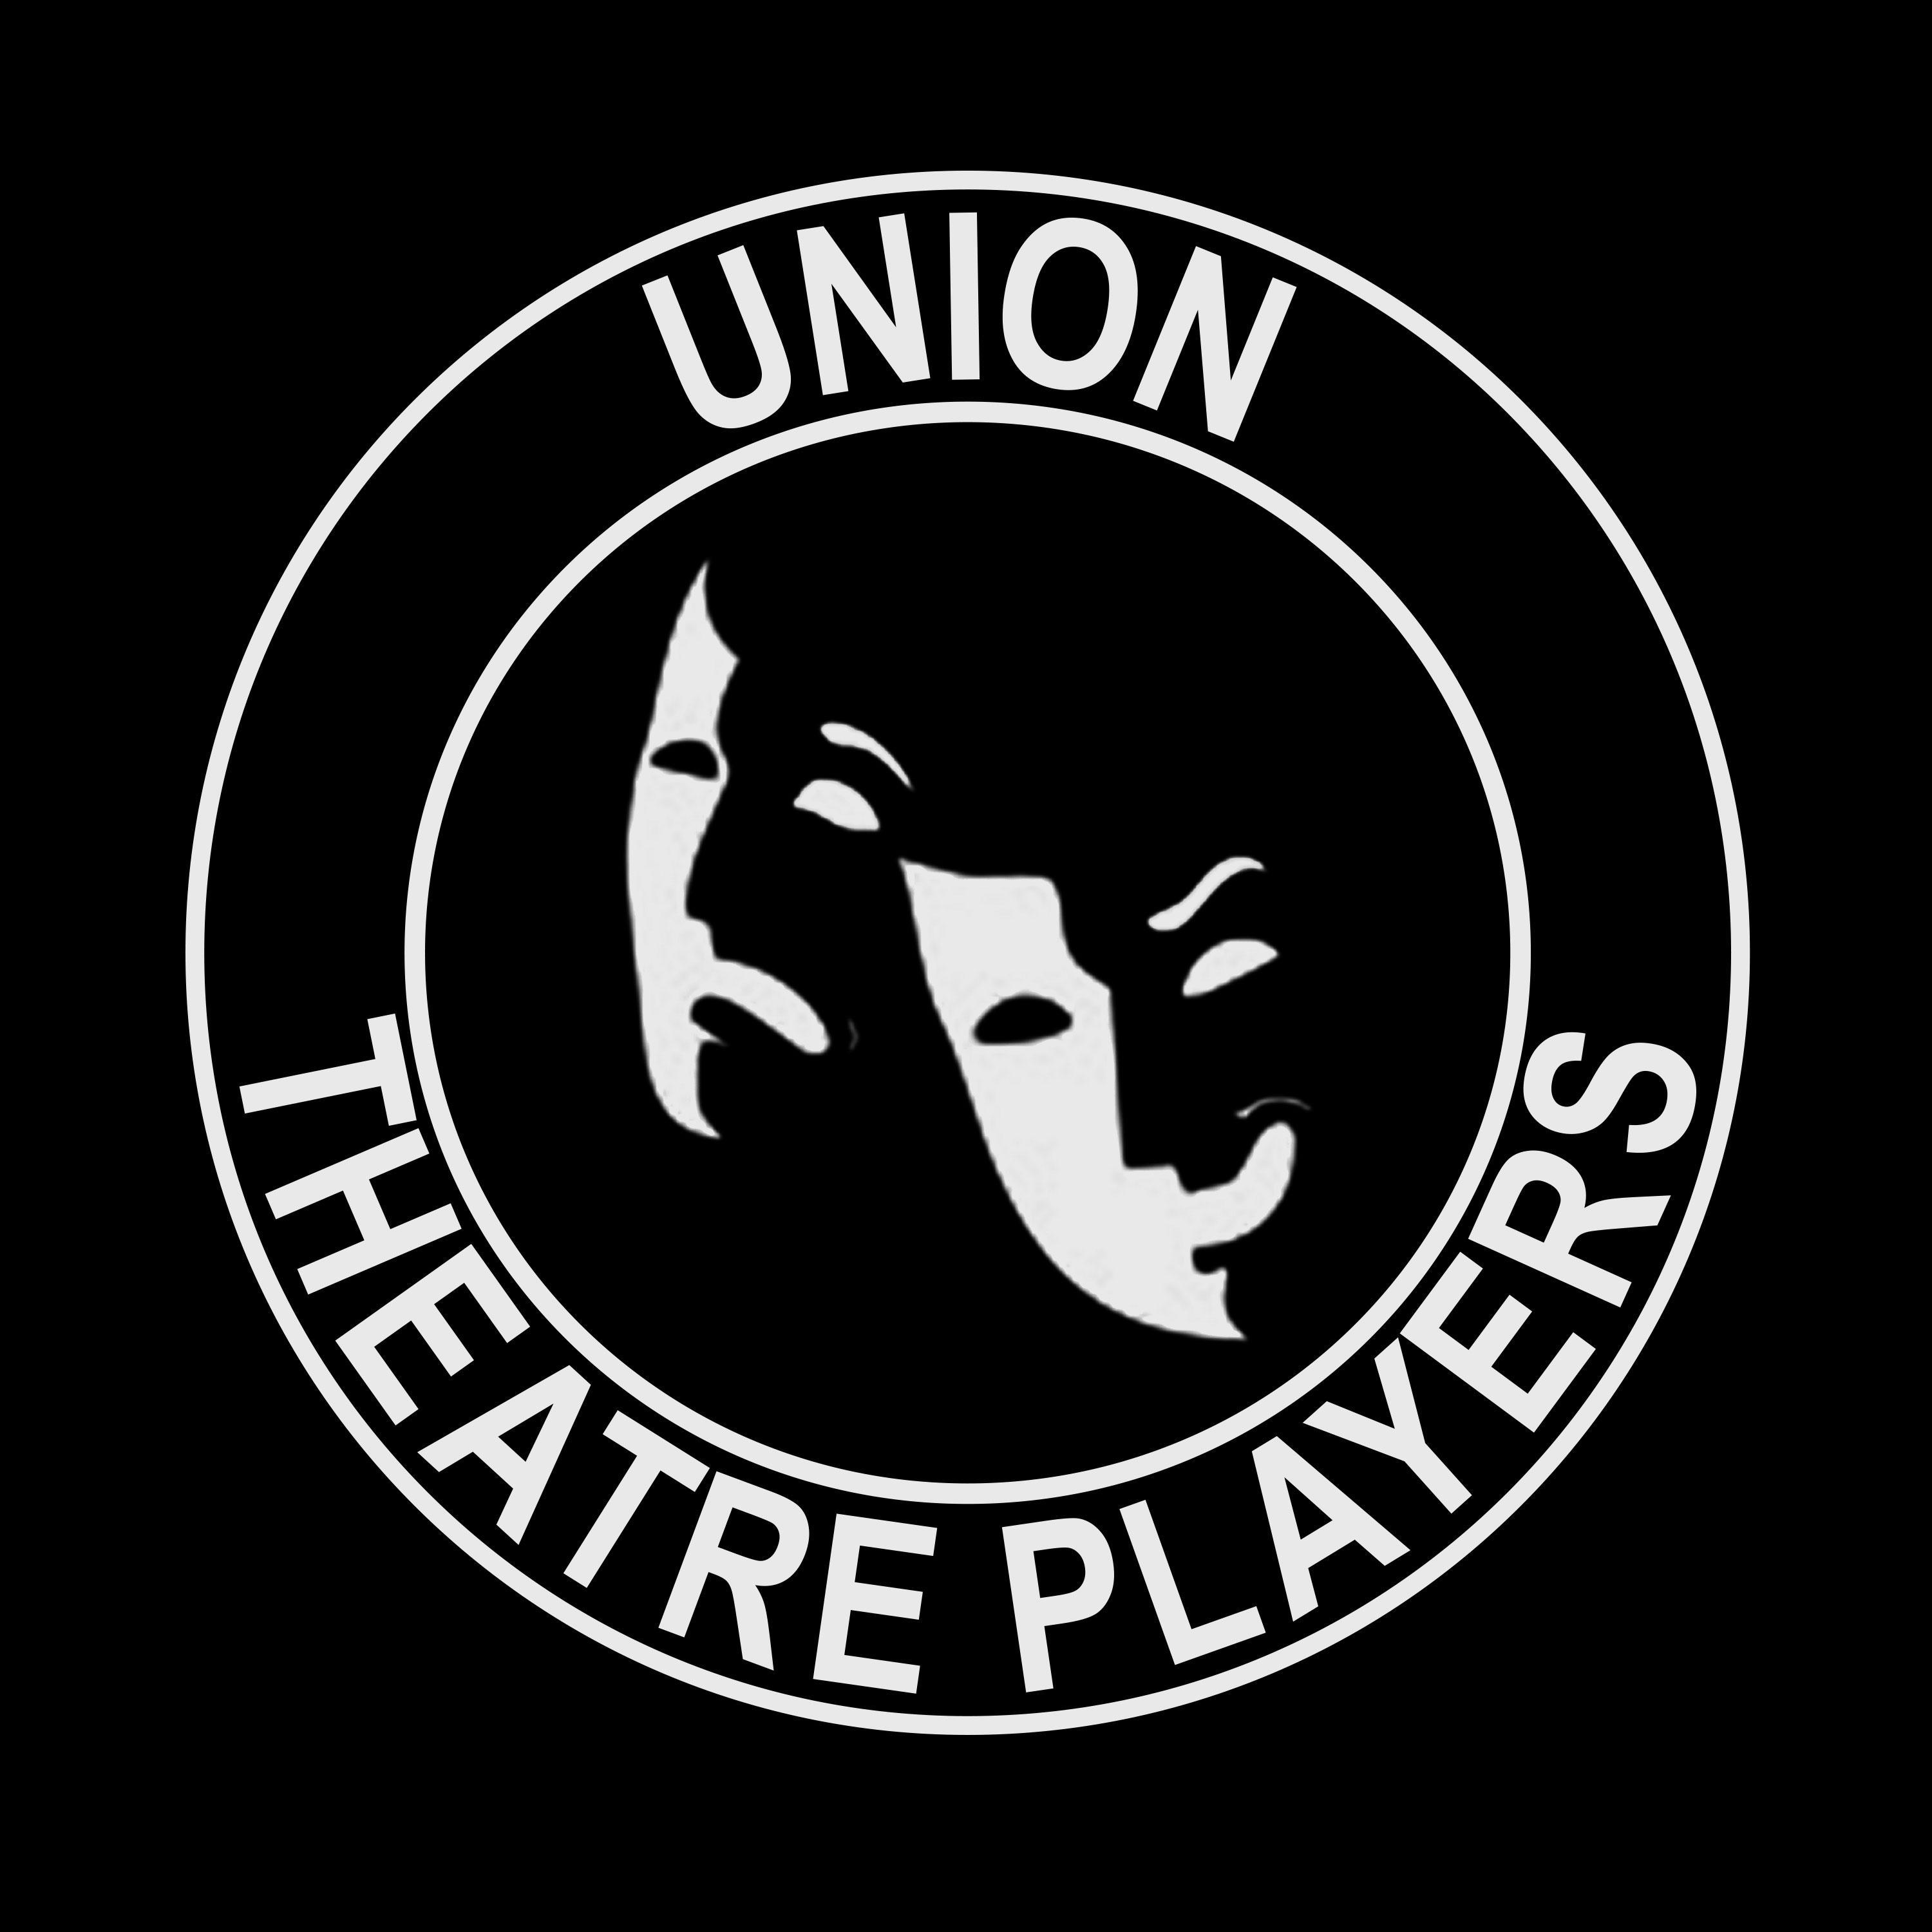 The award-winning theatre department at UHS. Instagram: unionthplayers